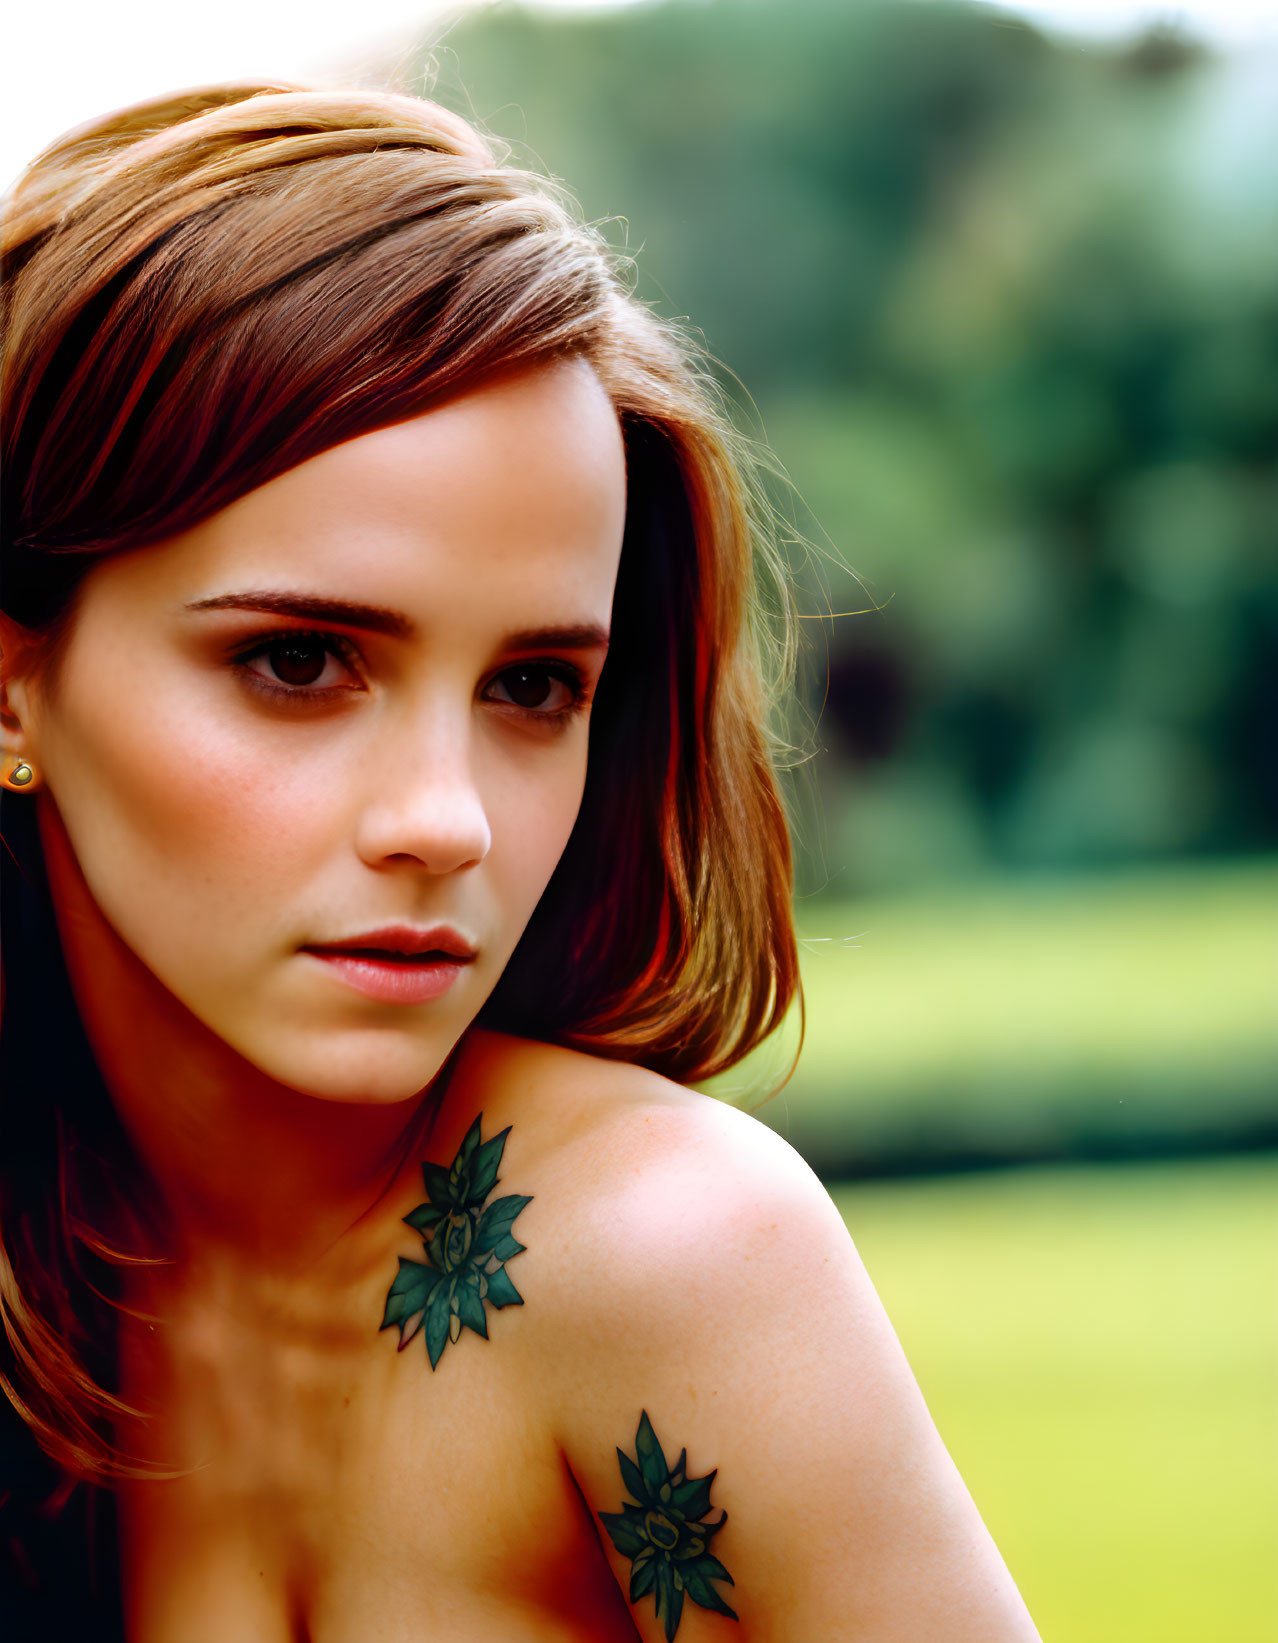 Short-haired woman with shoulder tattoos in thoughtful pose on green backdrop.